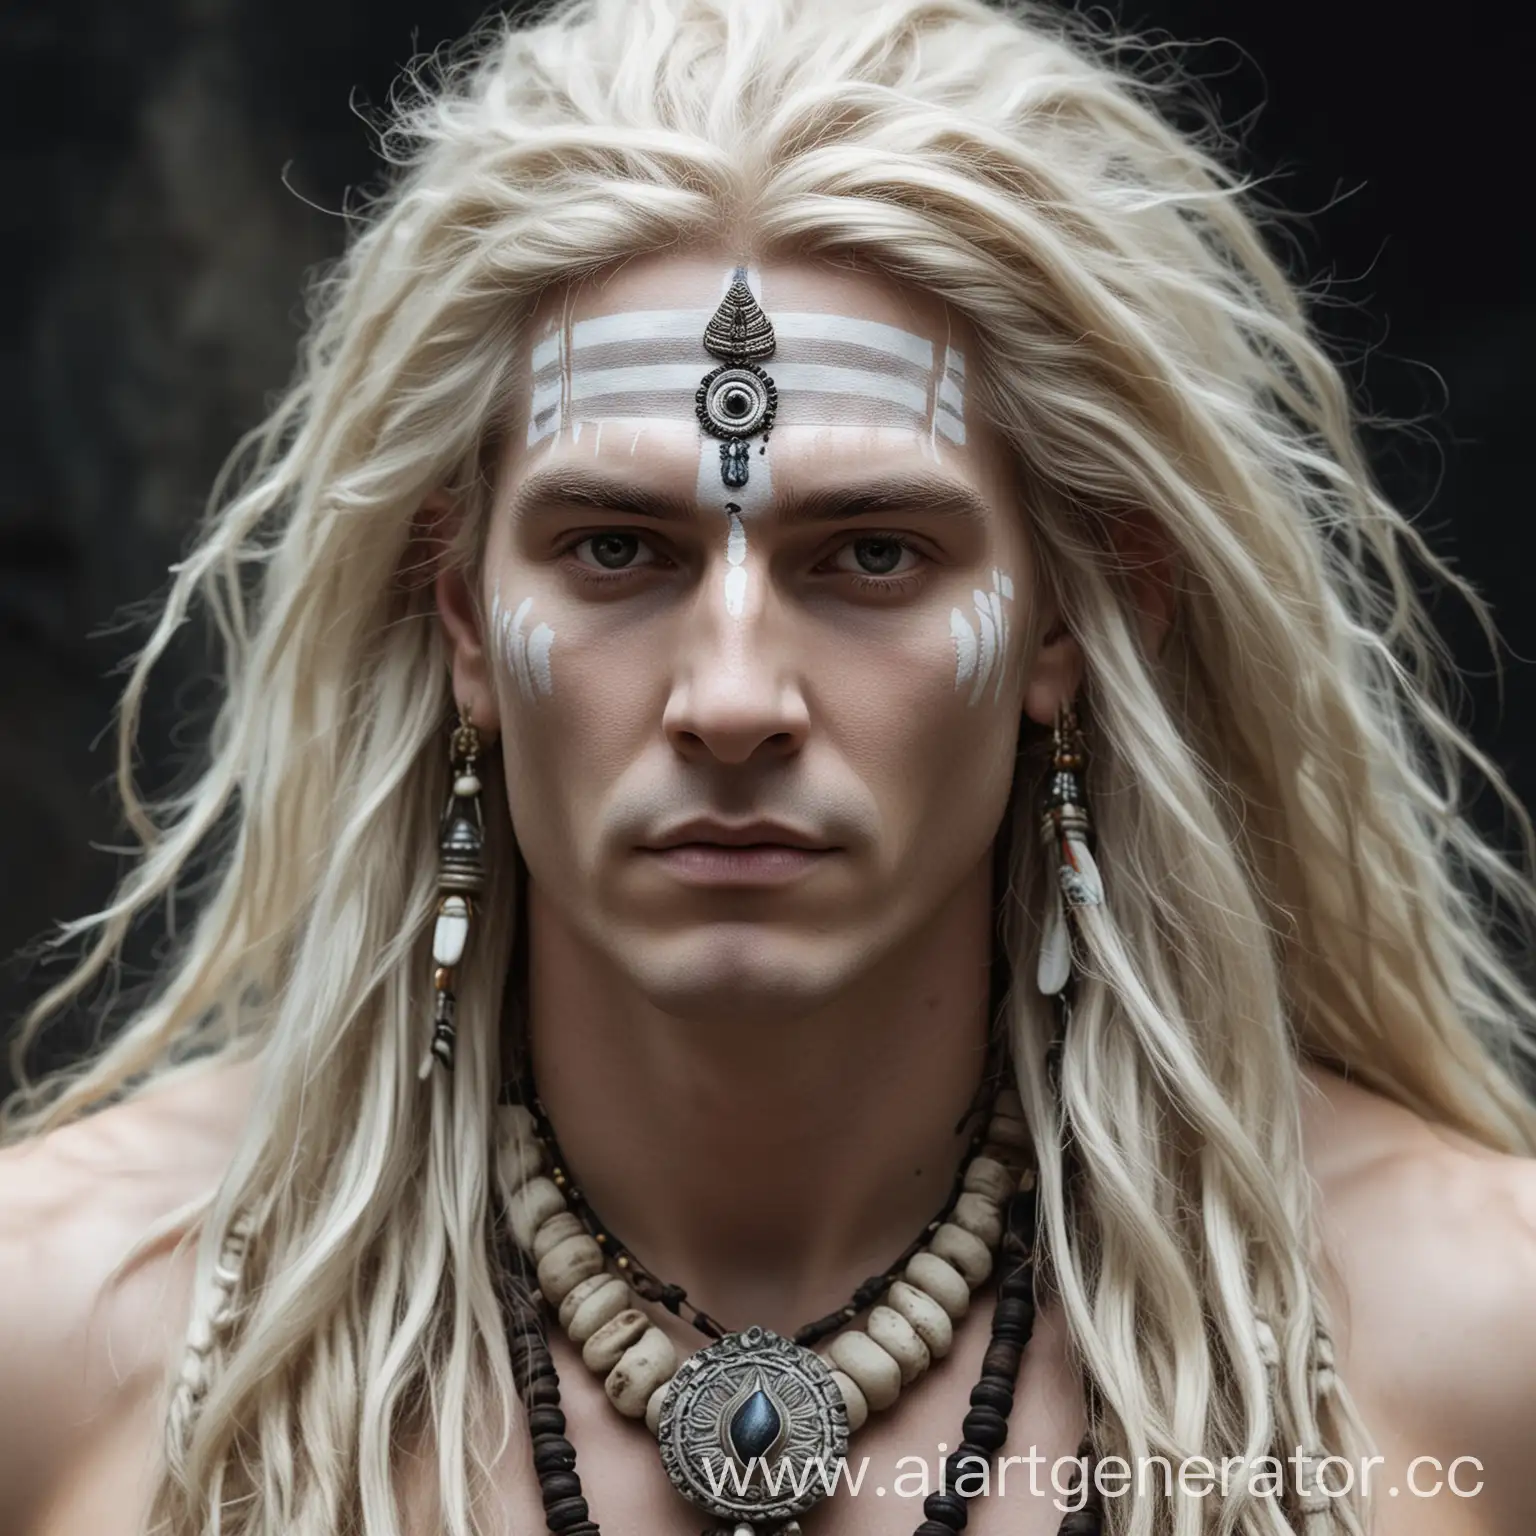 A white man, with white long hair, resembling an ancient Indian deity such as Shiva